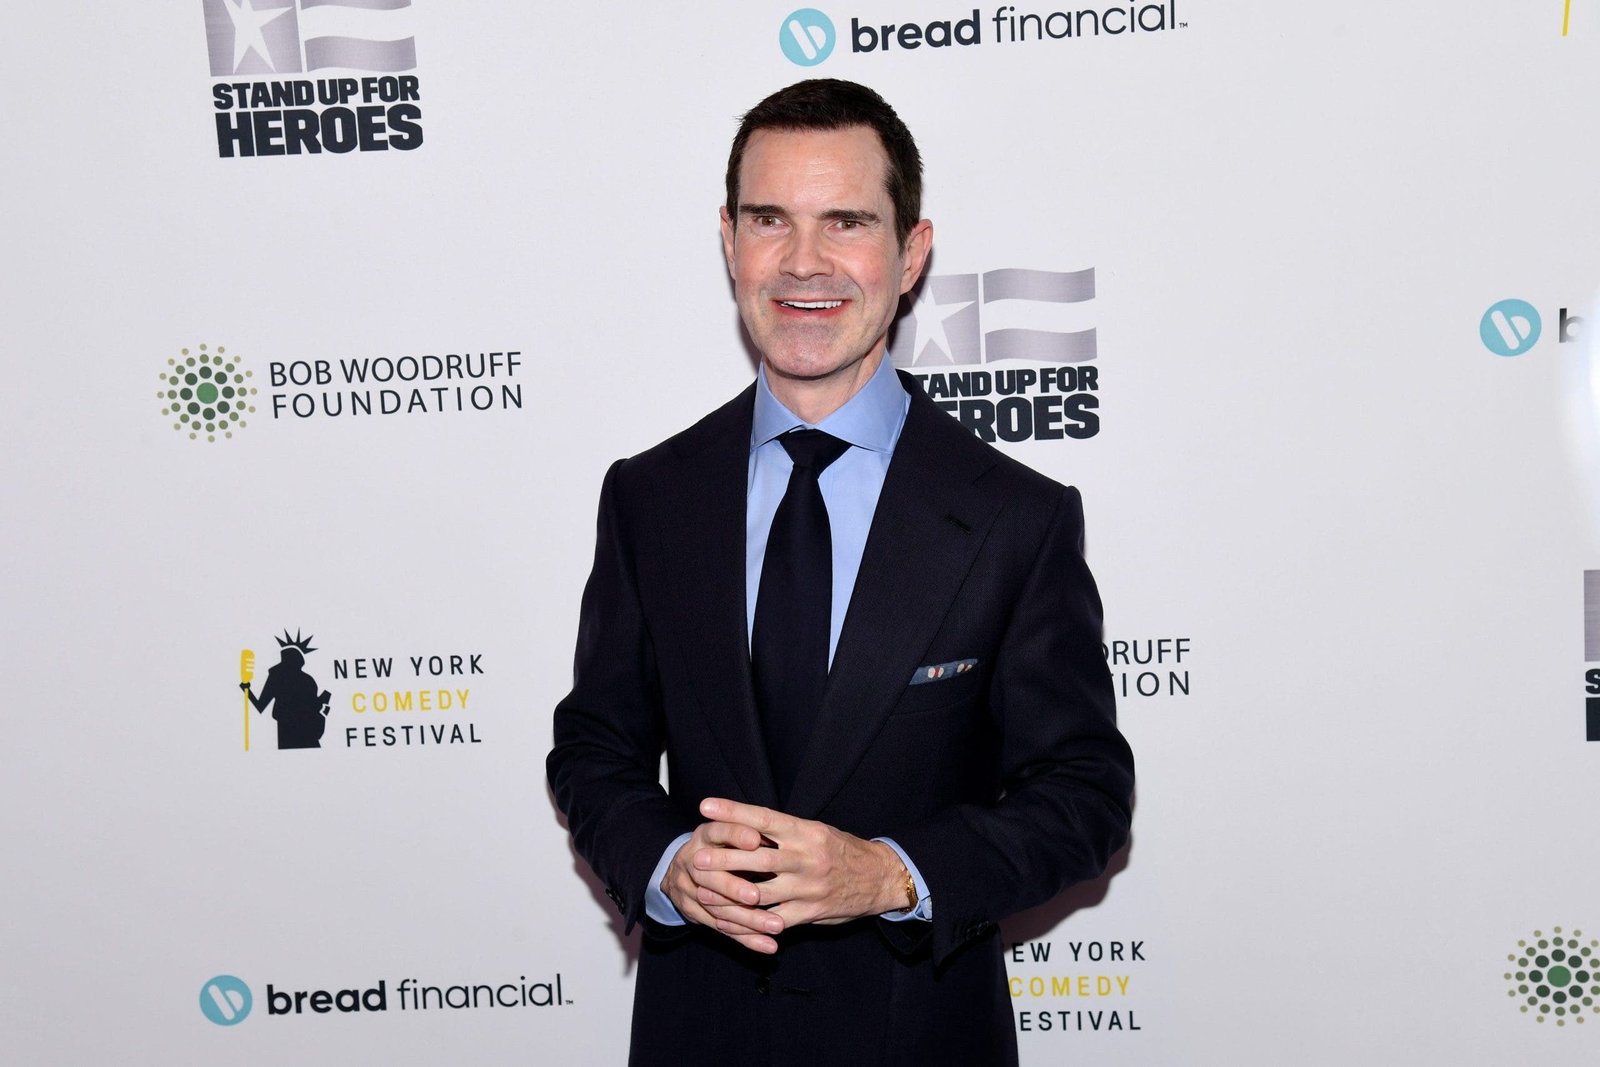 51-Year-Old British Comedy Icon Jimmy Carr Set to Ignite Laughter on the Sunny Shores of Costa del Sol! - jimmy carr scaled 1 - Local Events and Festivities - Jimmy Carr Set